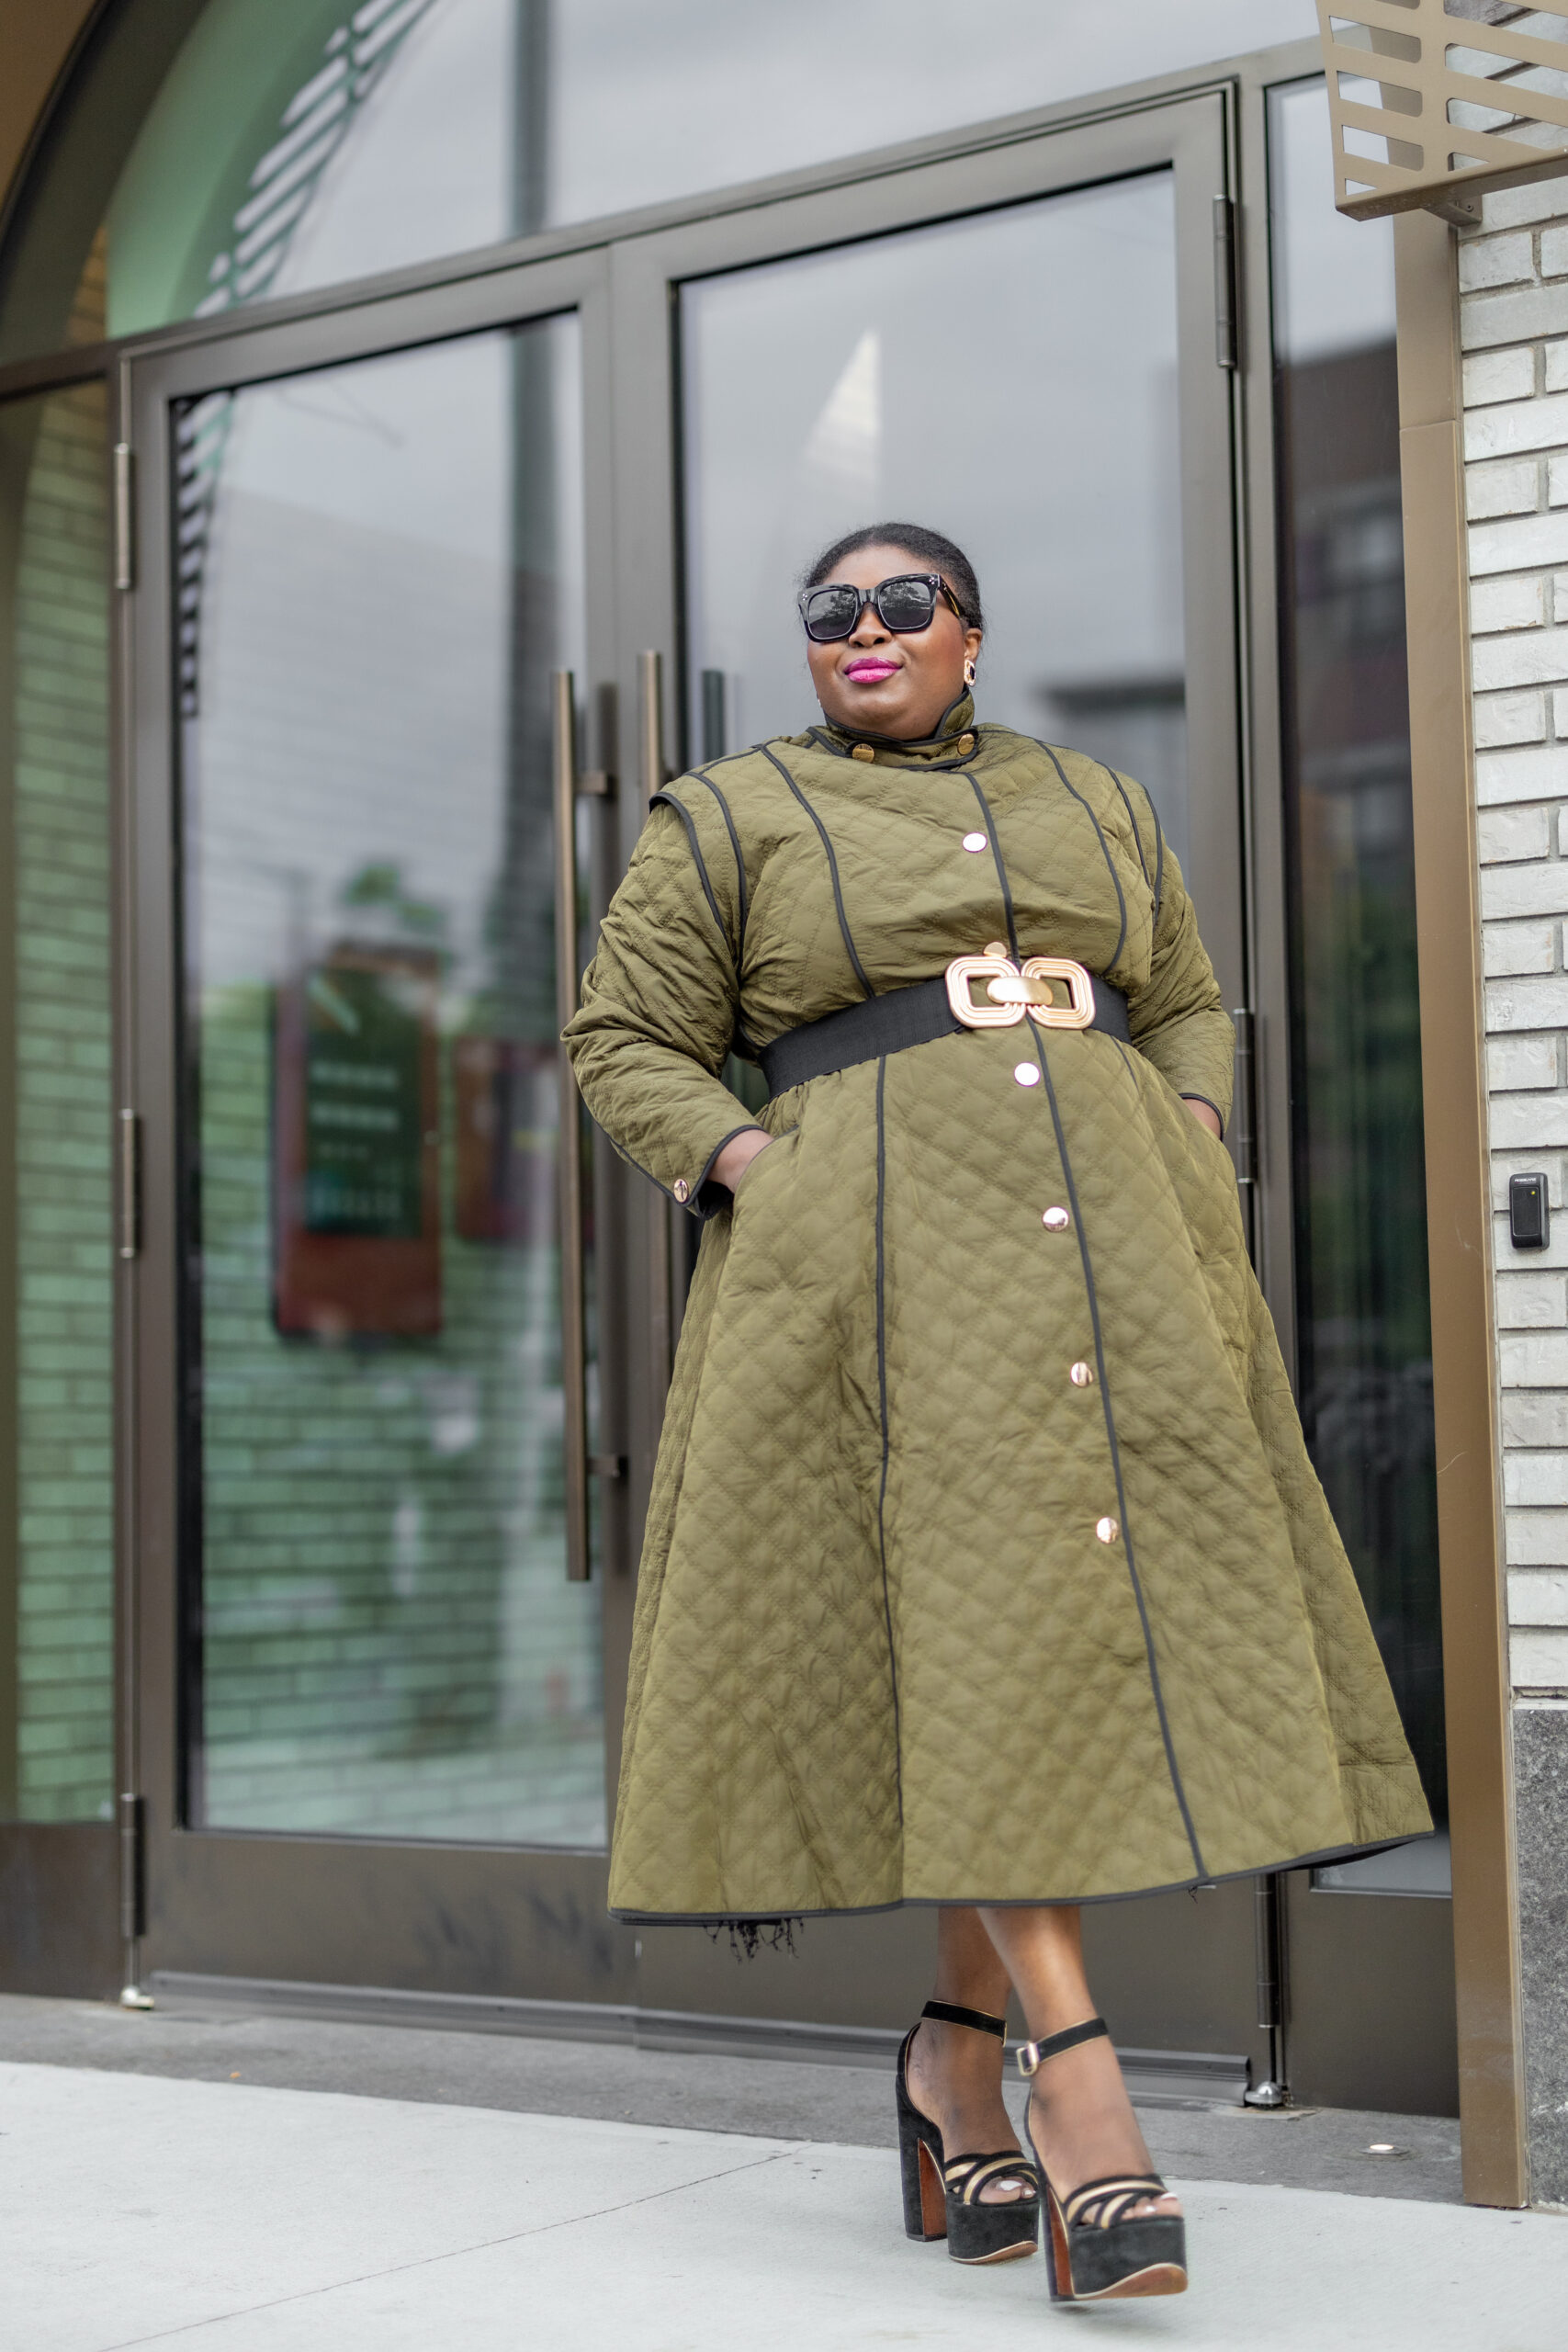 A Black woman wearing a quilted green coat dress with a black belt around the waist and black platform sandals. She's wearing sunglasses